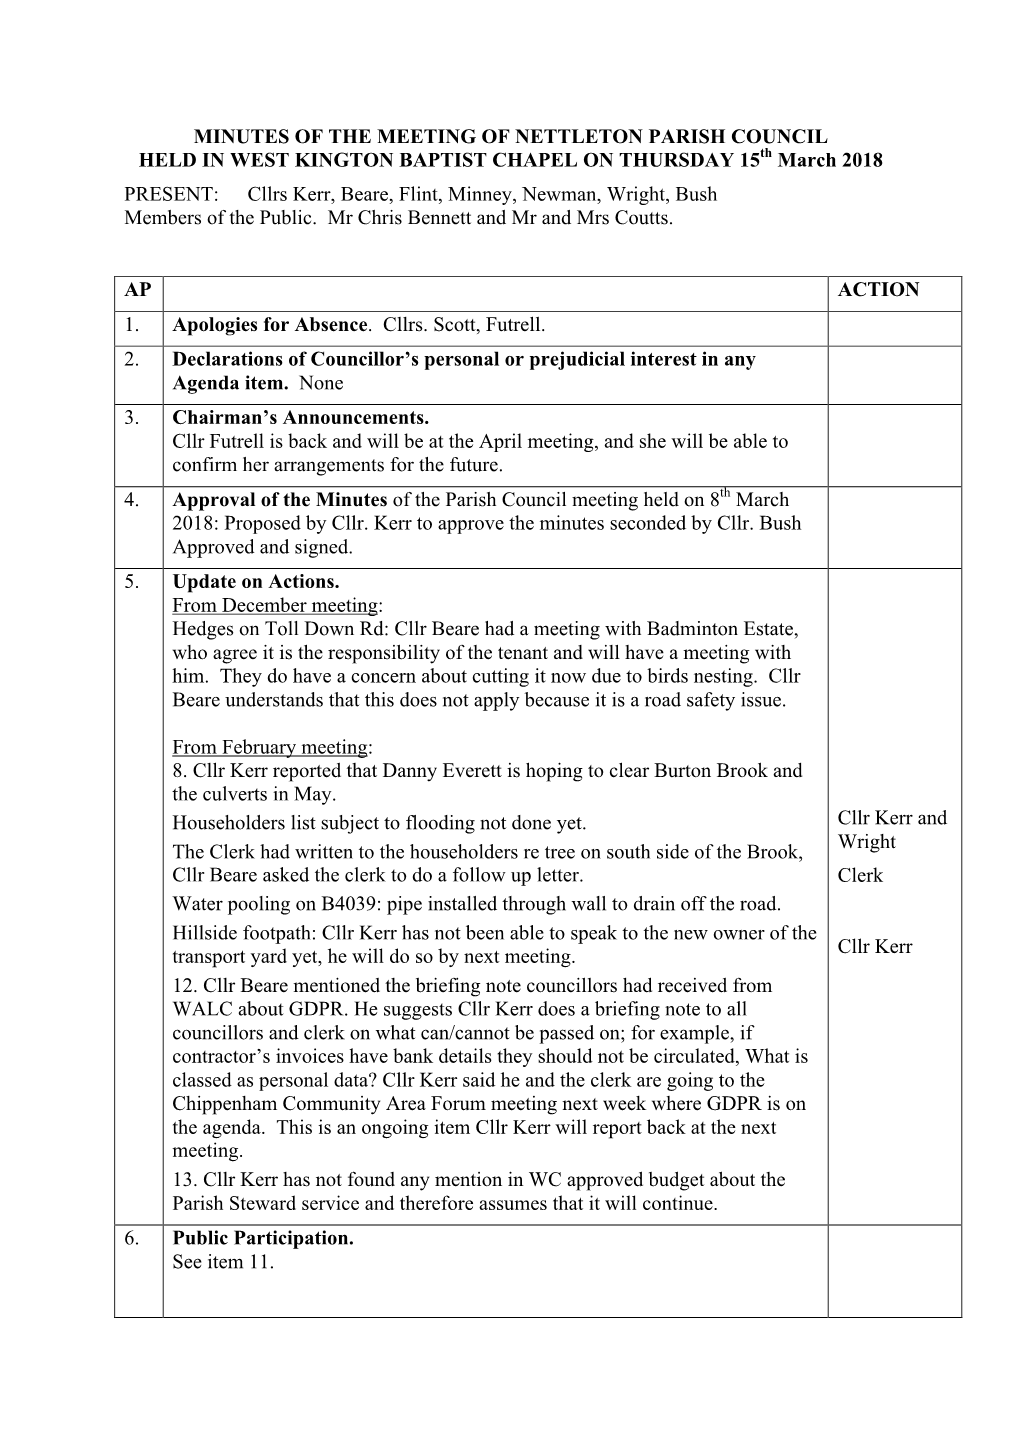 Minutes of the Meeting of Nettleton Parish Council